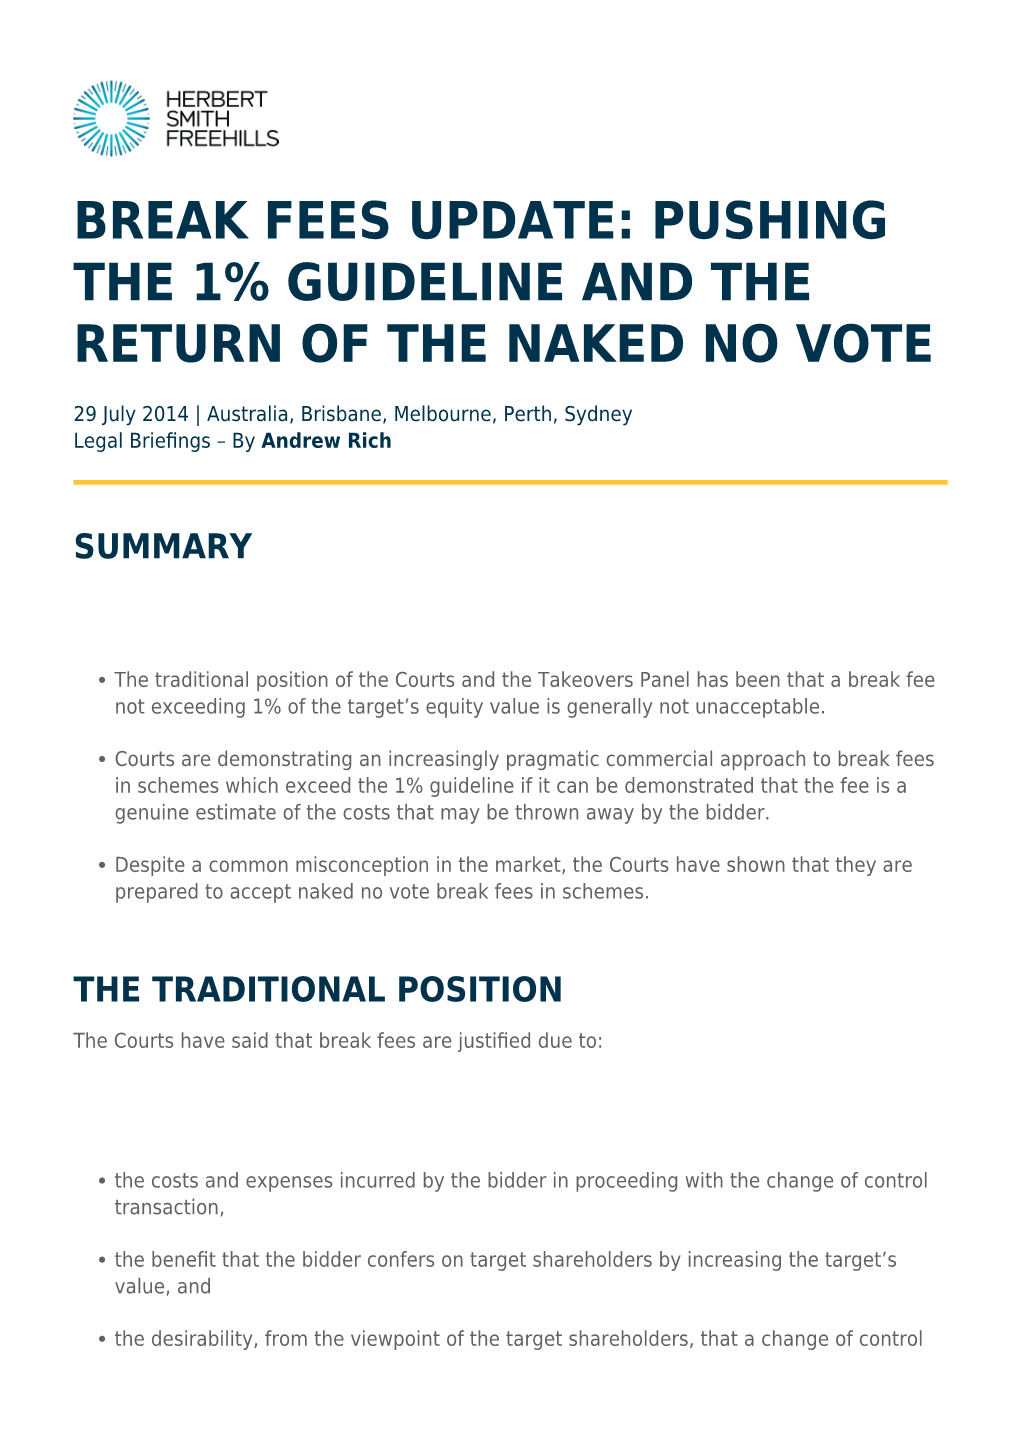 Break Fees Update: Pushing the 1% Guideline and the Return of the Naked No Vote